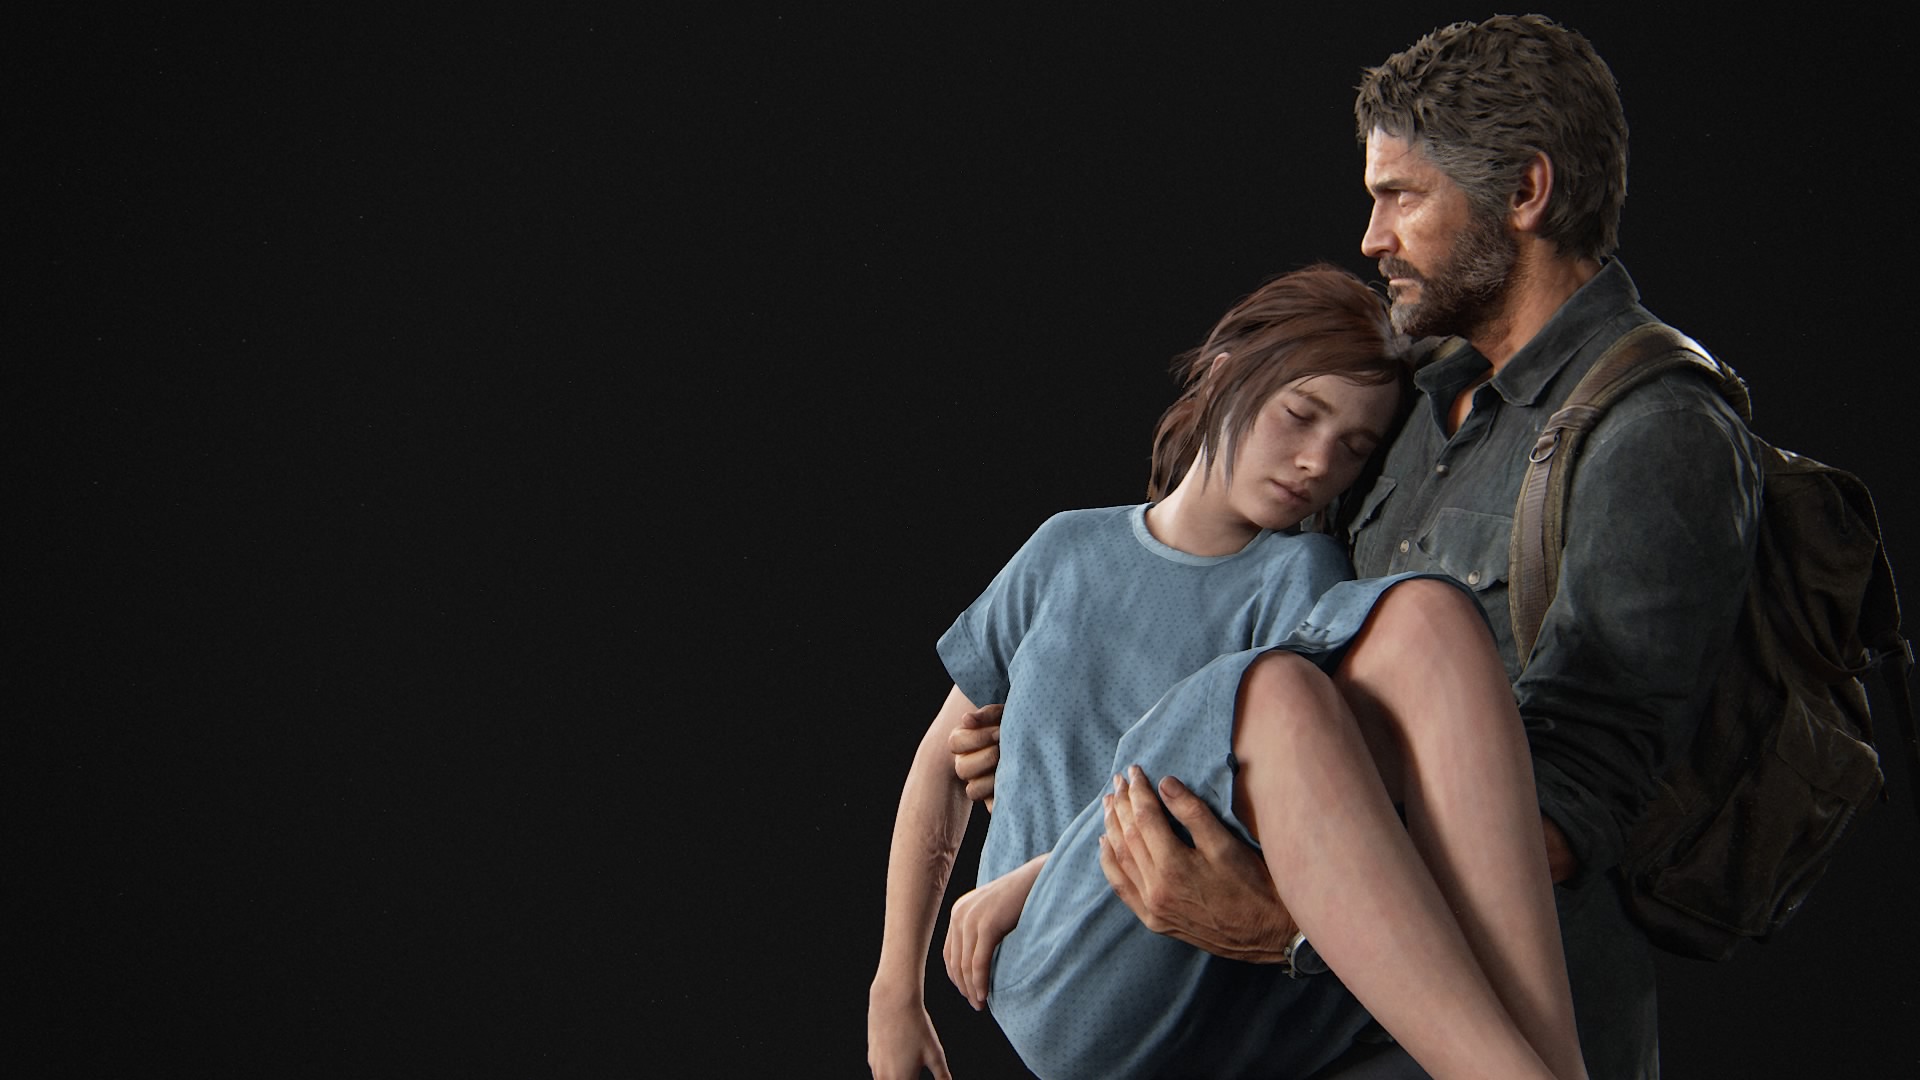 Tall of us. Джоэл the last of us. Джоэл the last of us 2. Joel Miller.